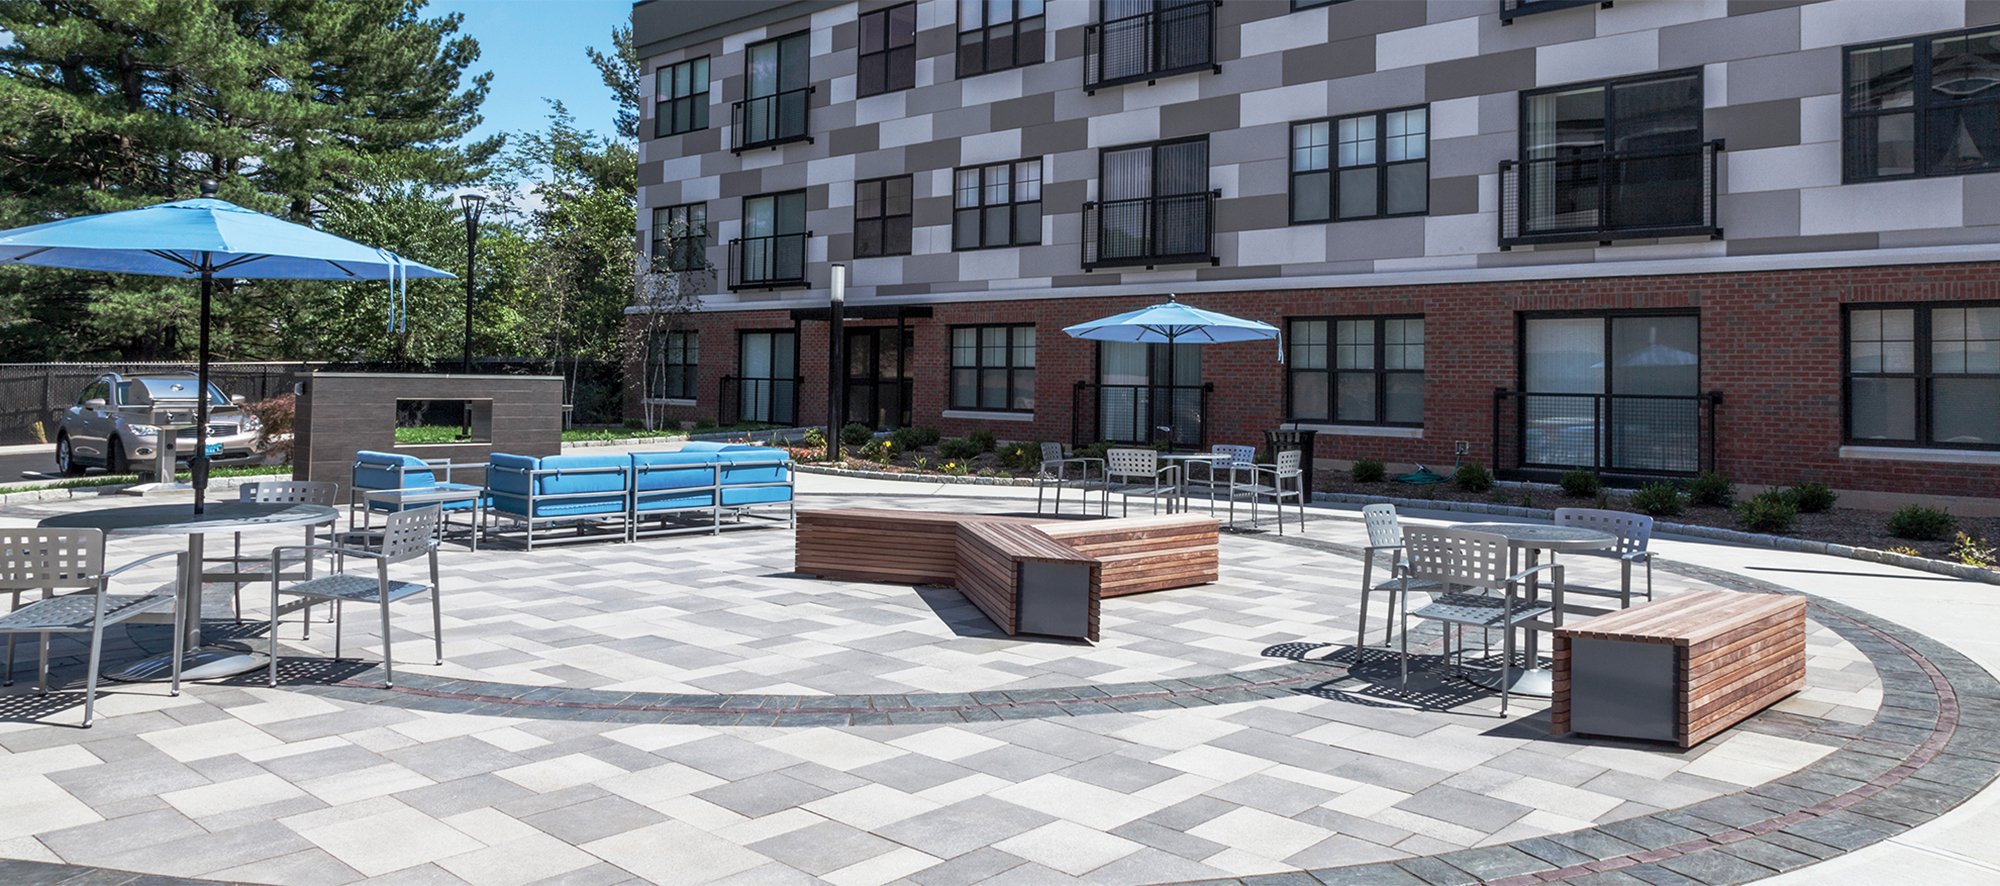 An apartment complex has an outdoor amenity space of Umbriano pavers with contrasting circular patterns of Copthorne and Richcliff.